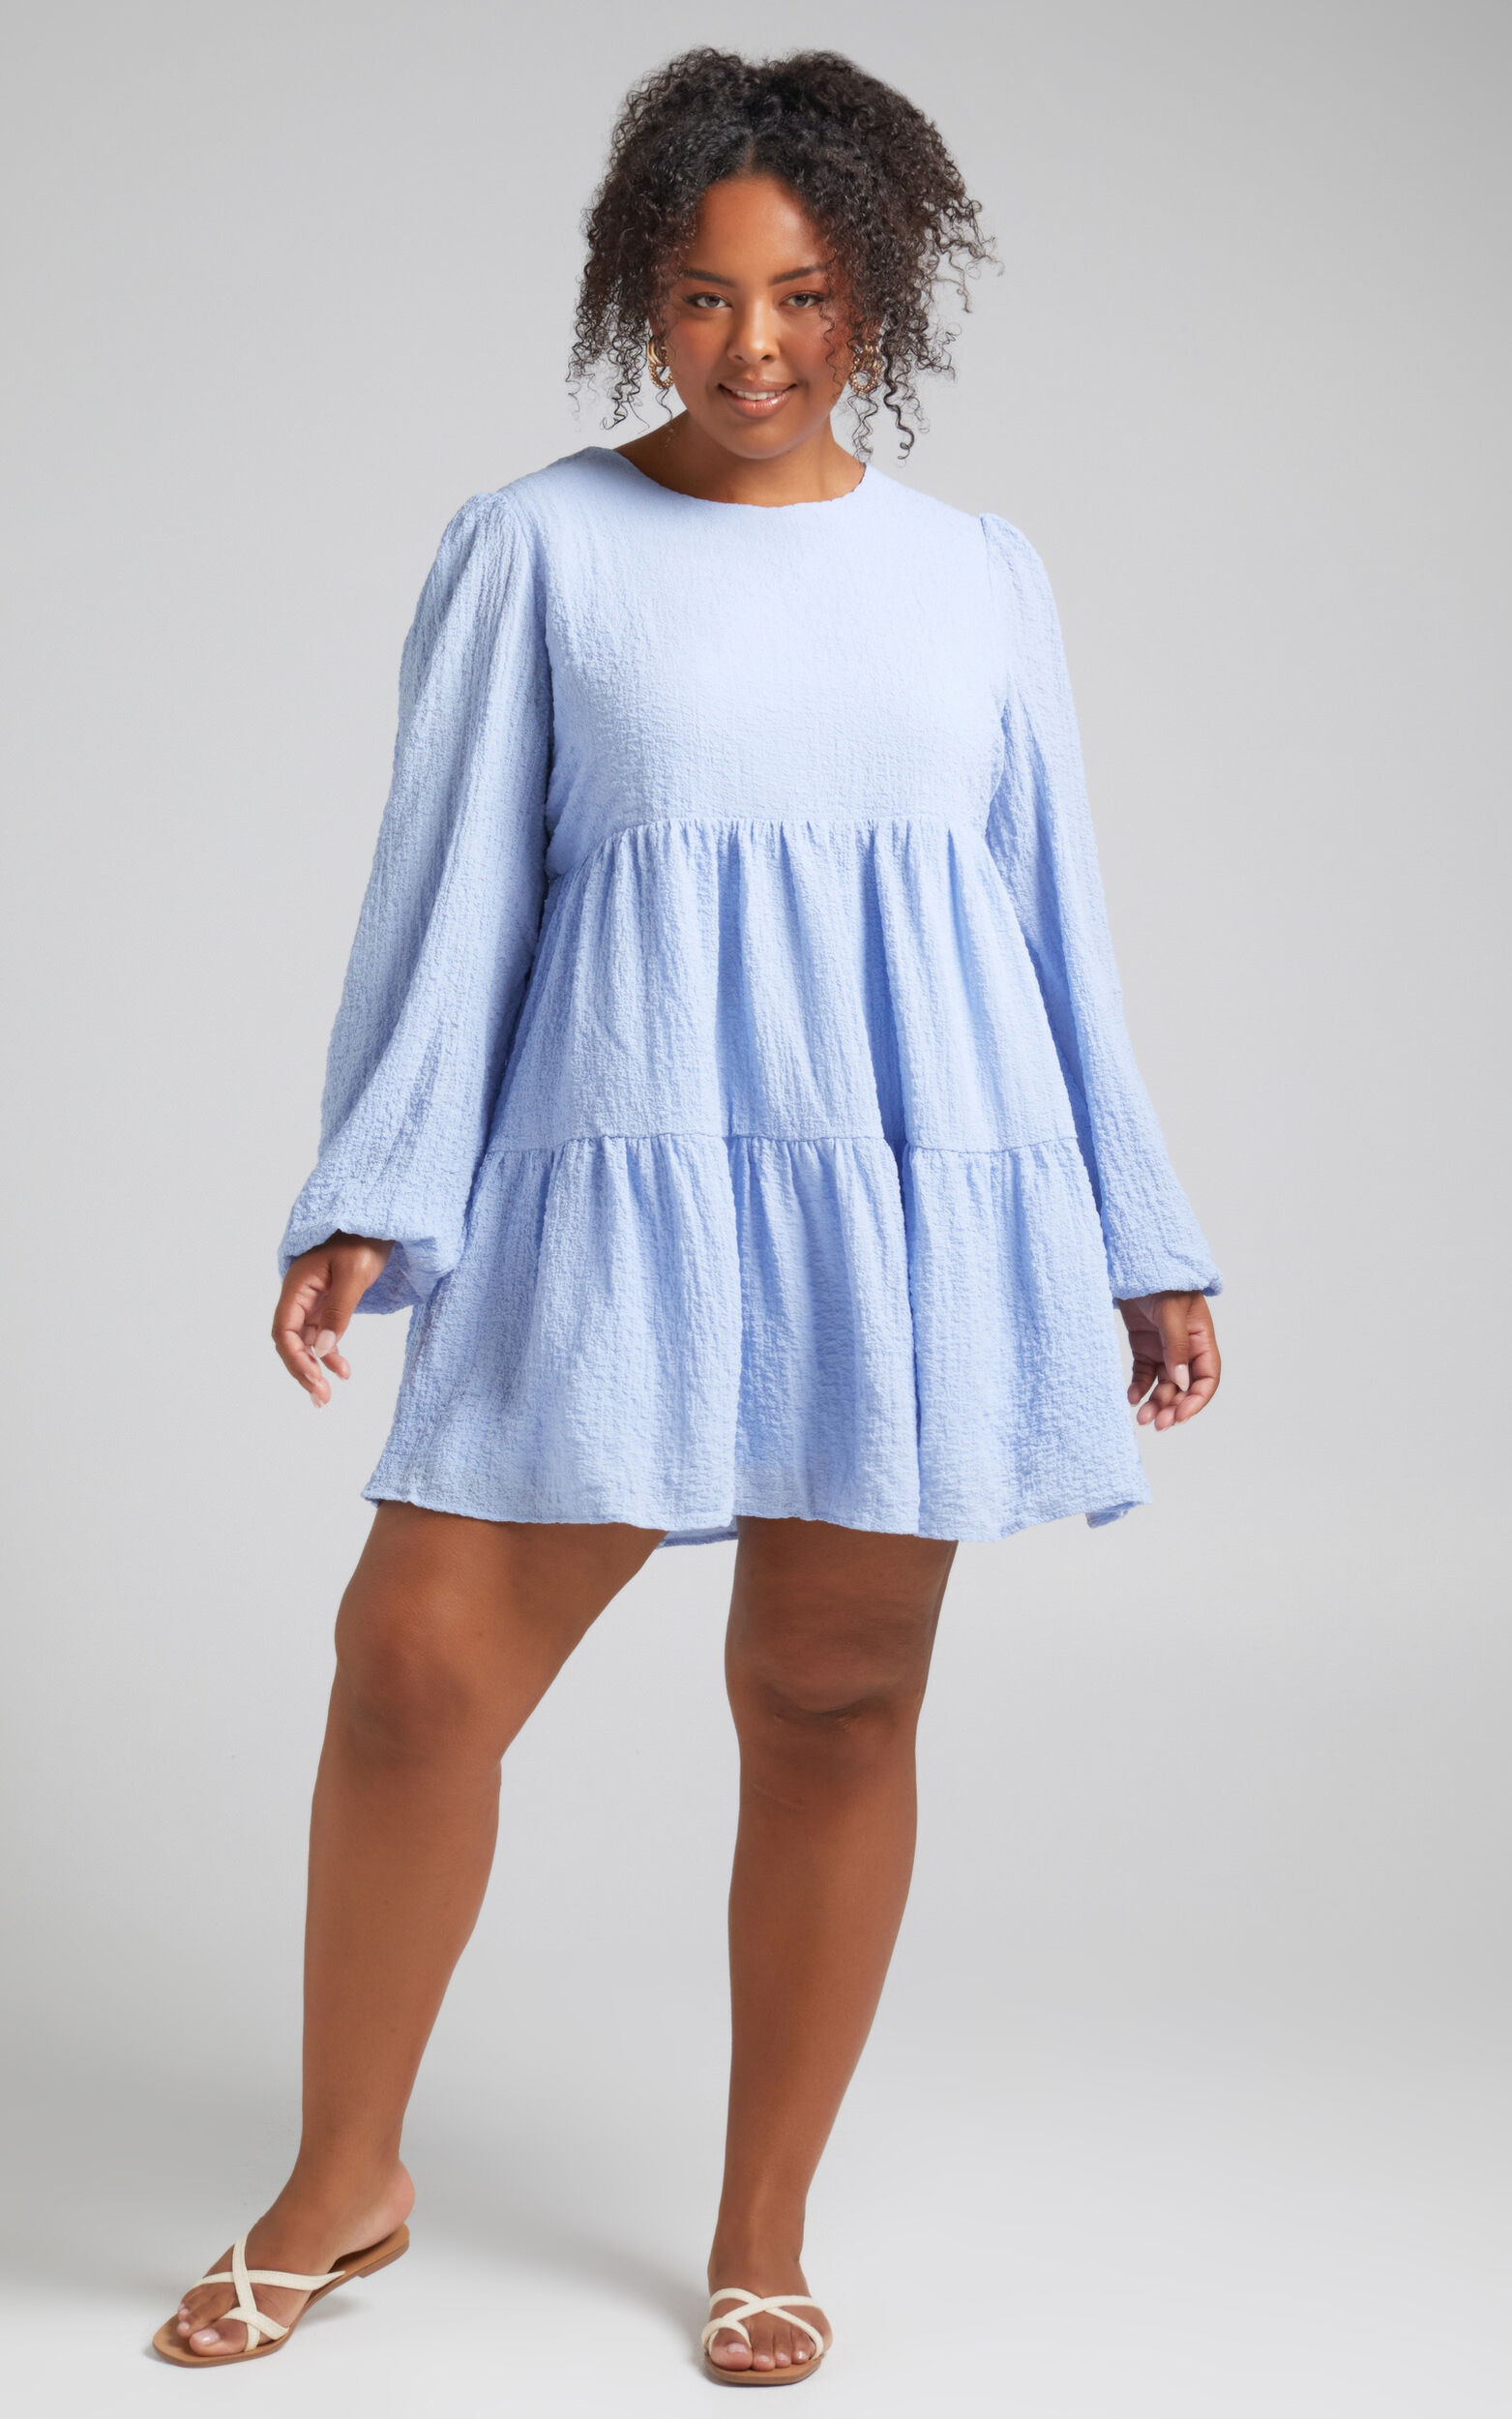 Marney Long Sleeve Tiered Shift Dress in Blue - 04, BLU1, super-hi-res image number null